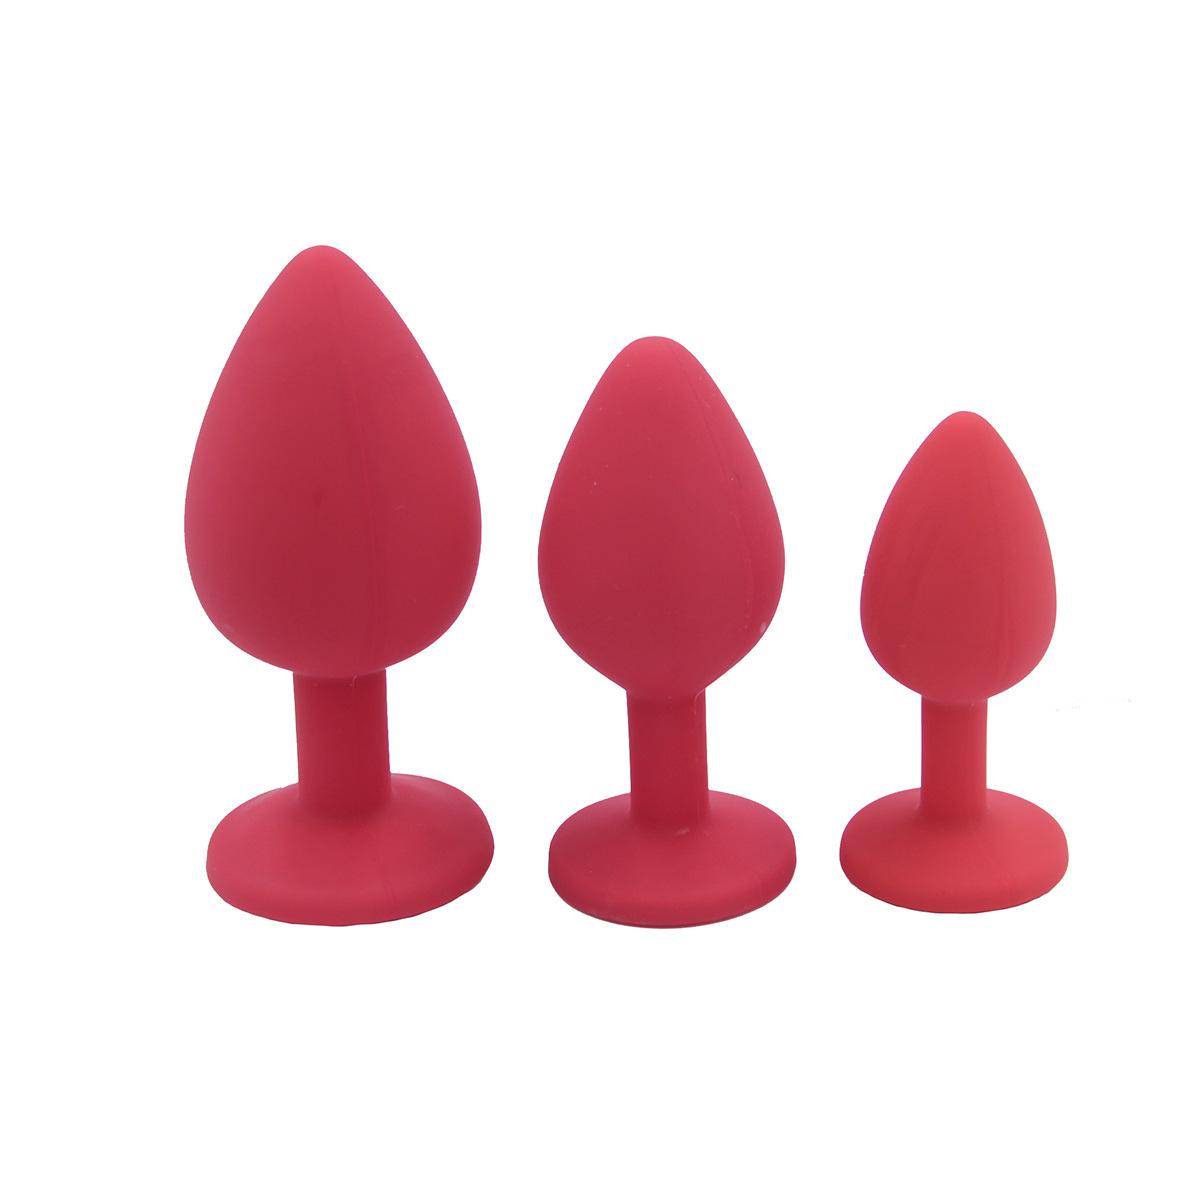 Orissi, large, medium and small, color silicone anal plug( 3 piece set)